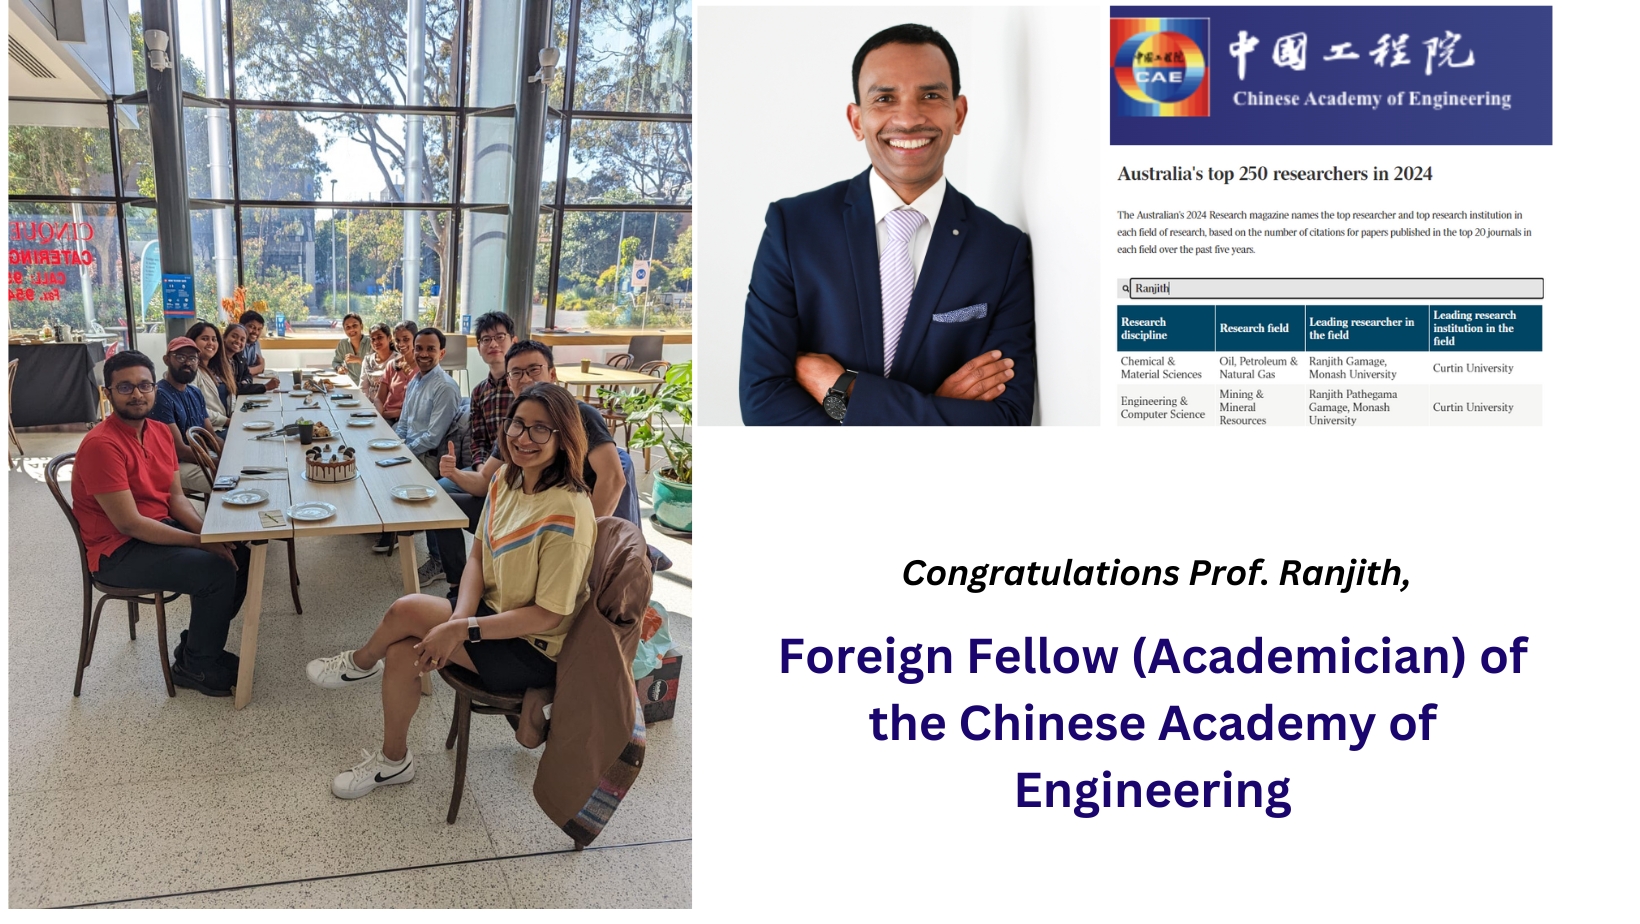 Foreign Fellow (Academician) of the Chinese Academy of Engineering